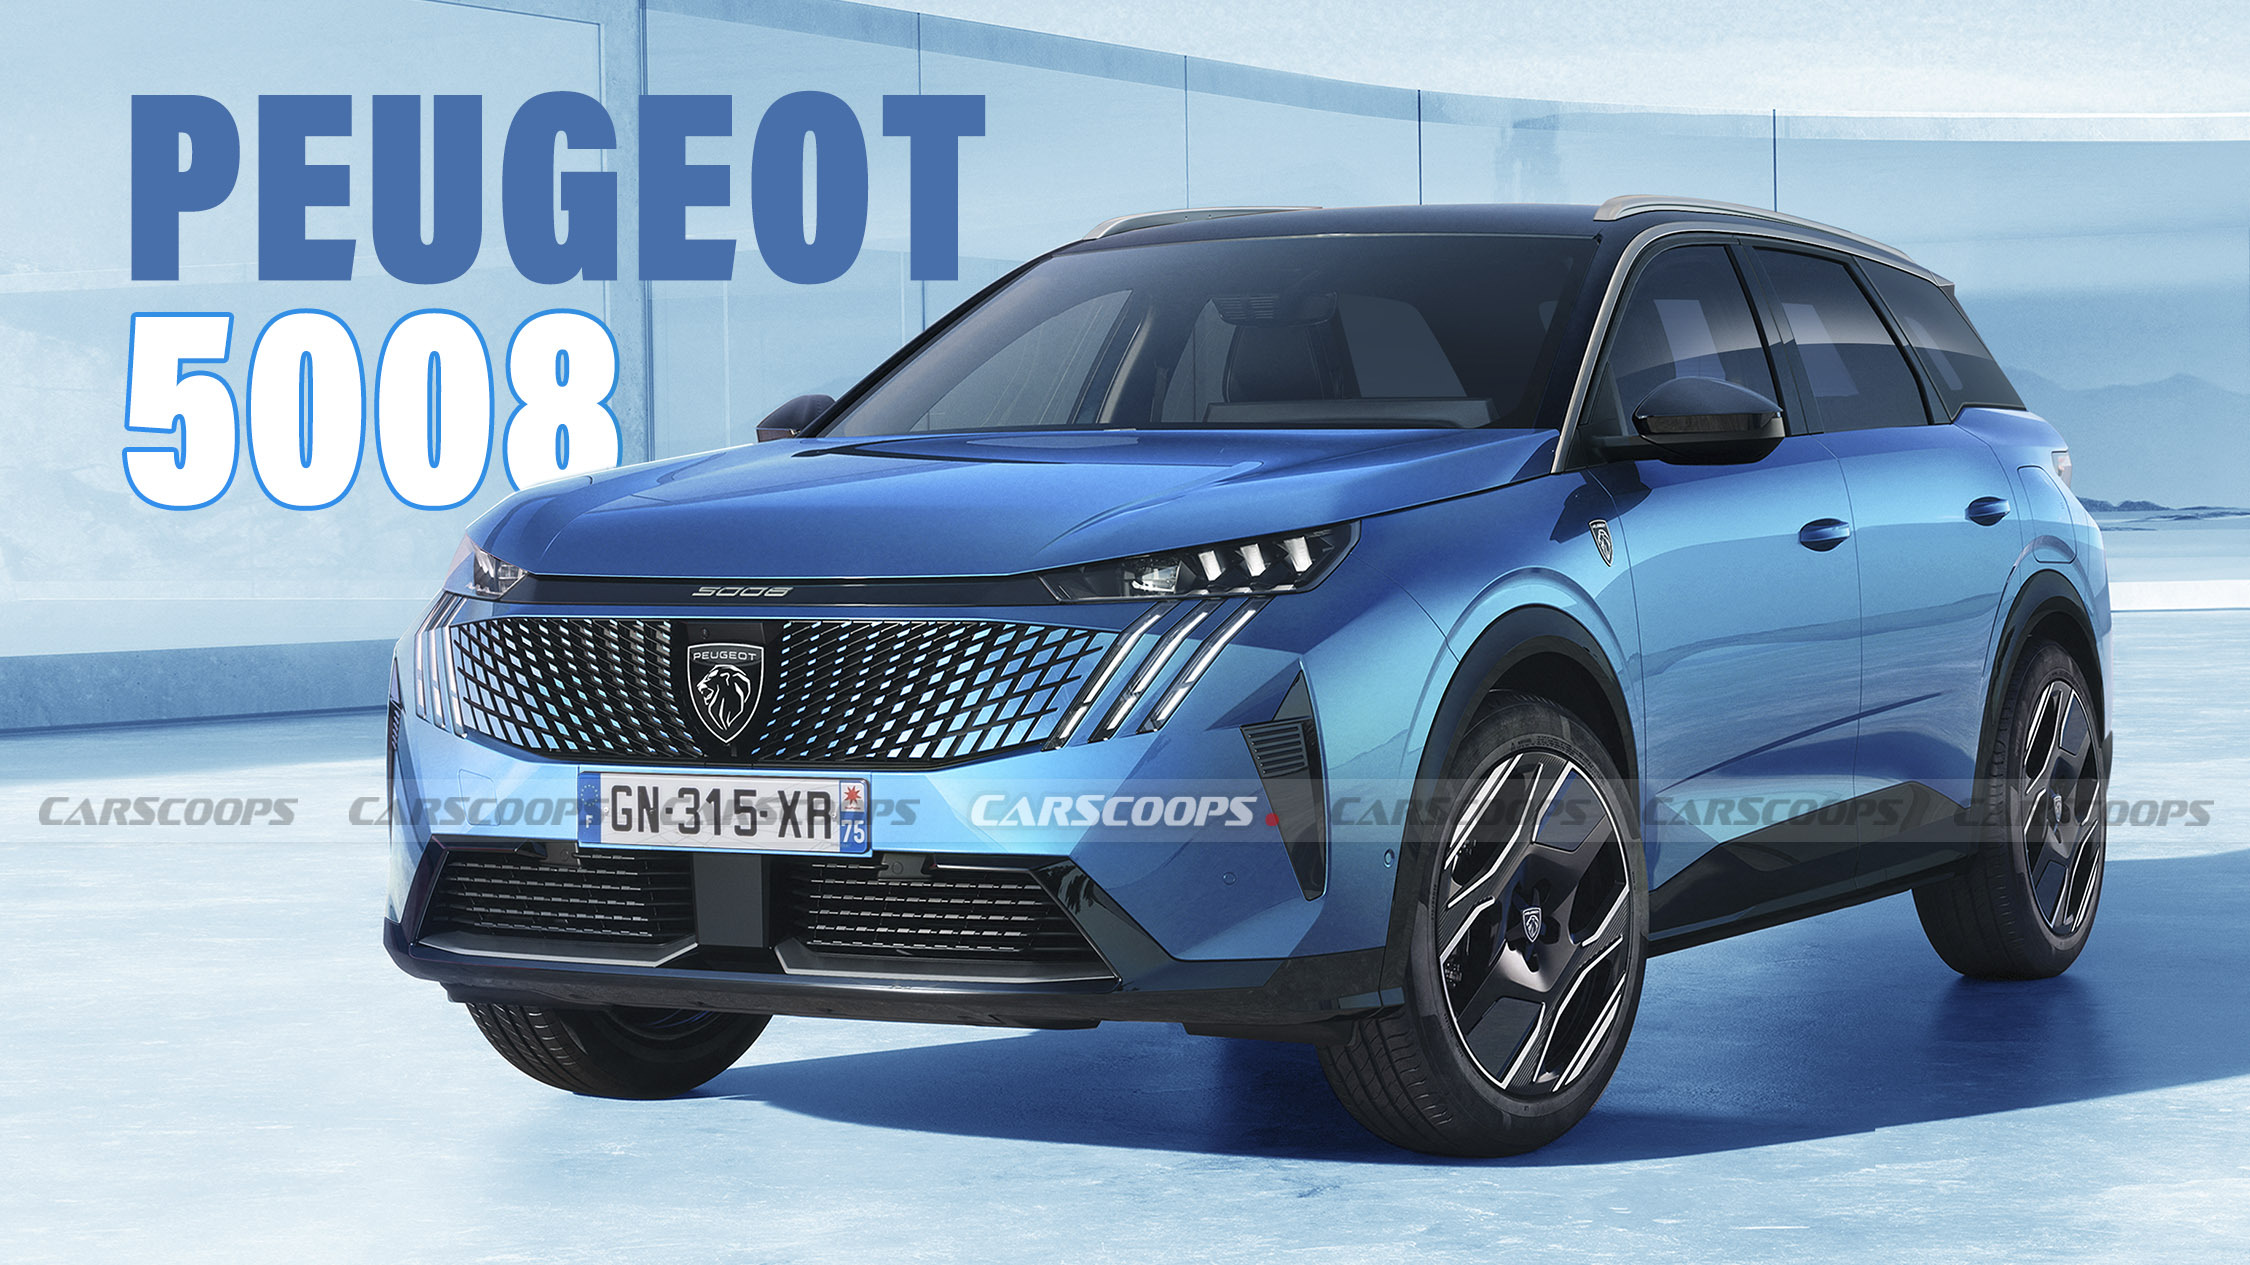 2024 Peugeot 5008: Everything We Know About The New Electric And Hybrid SUV